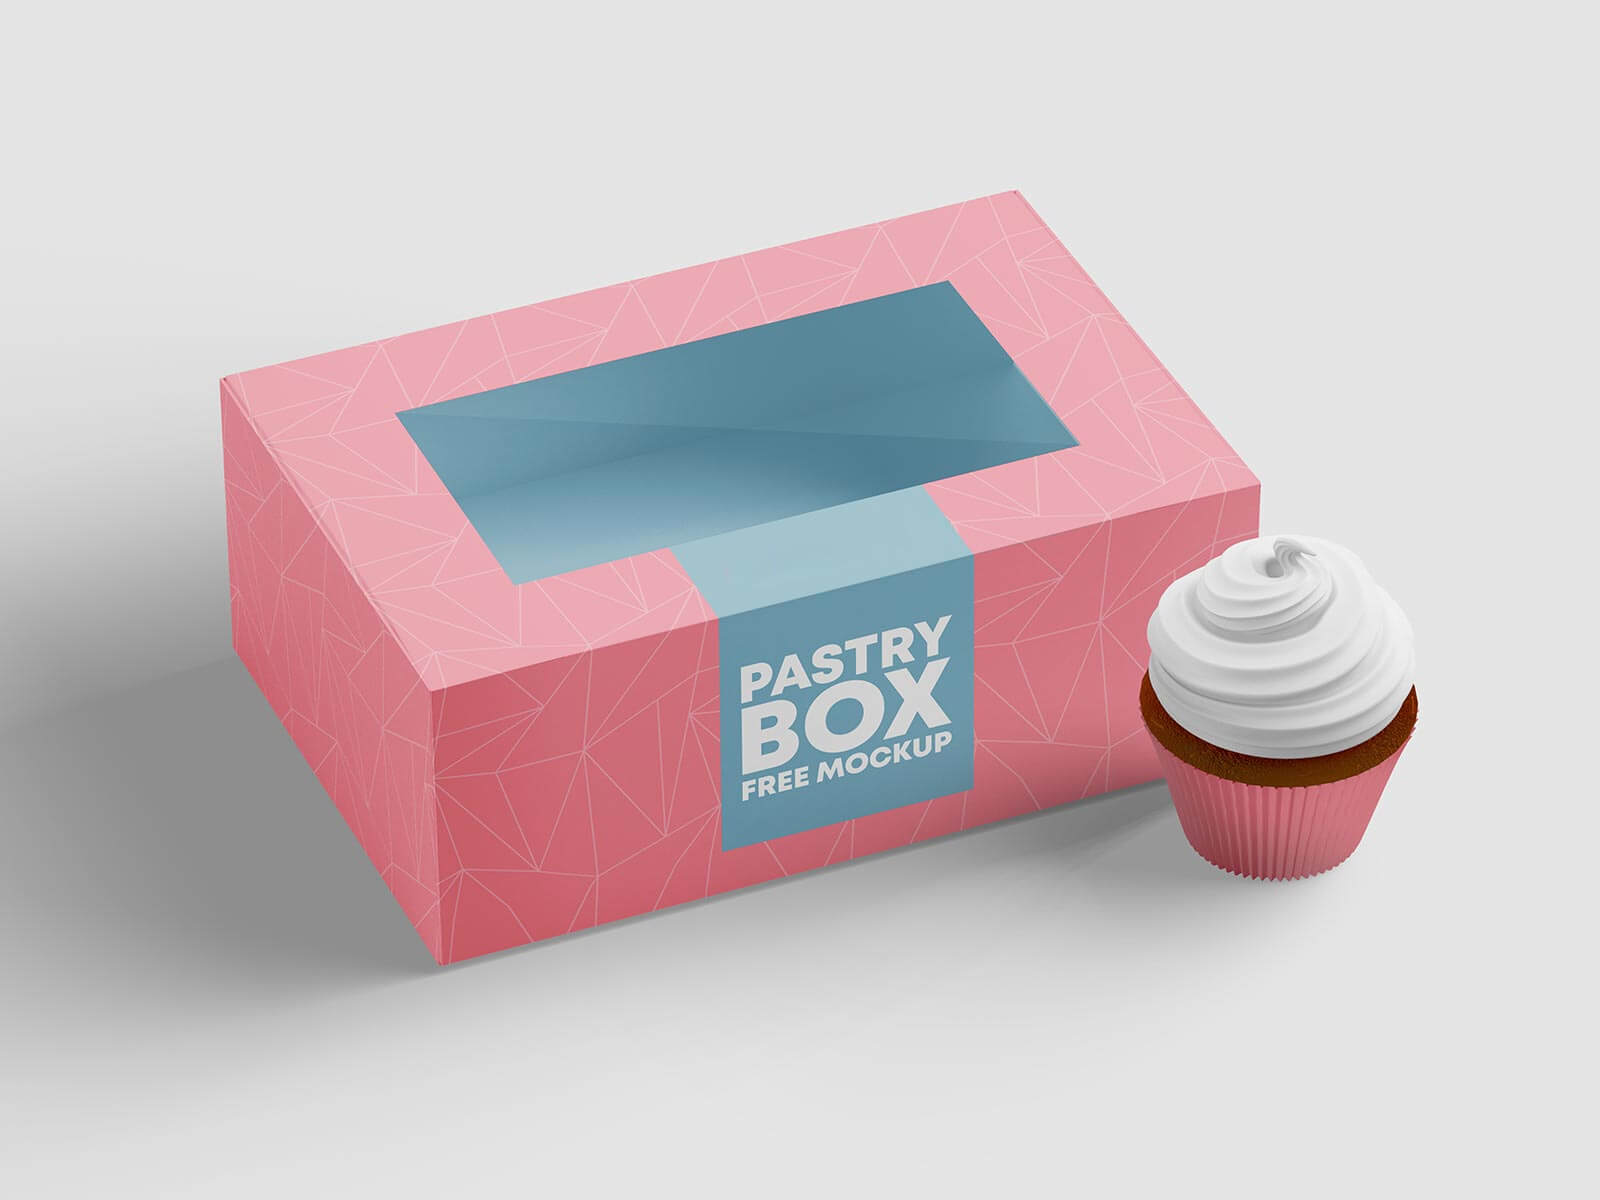 Item: Paper Round CakeBox Packaging Mockup by ina717 - shared by G4Ds